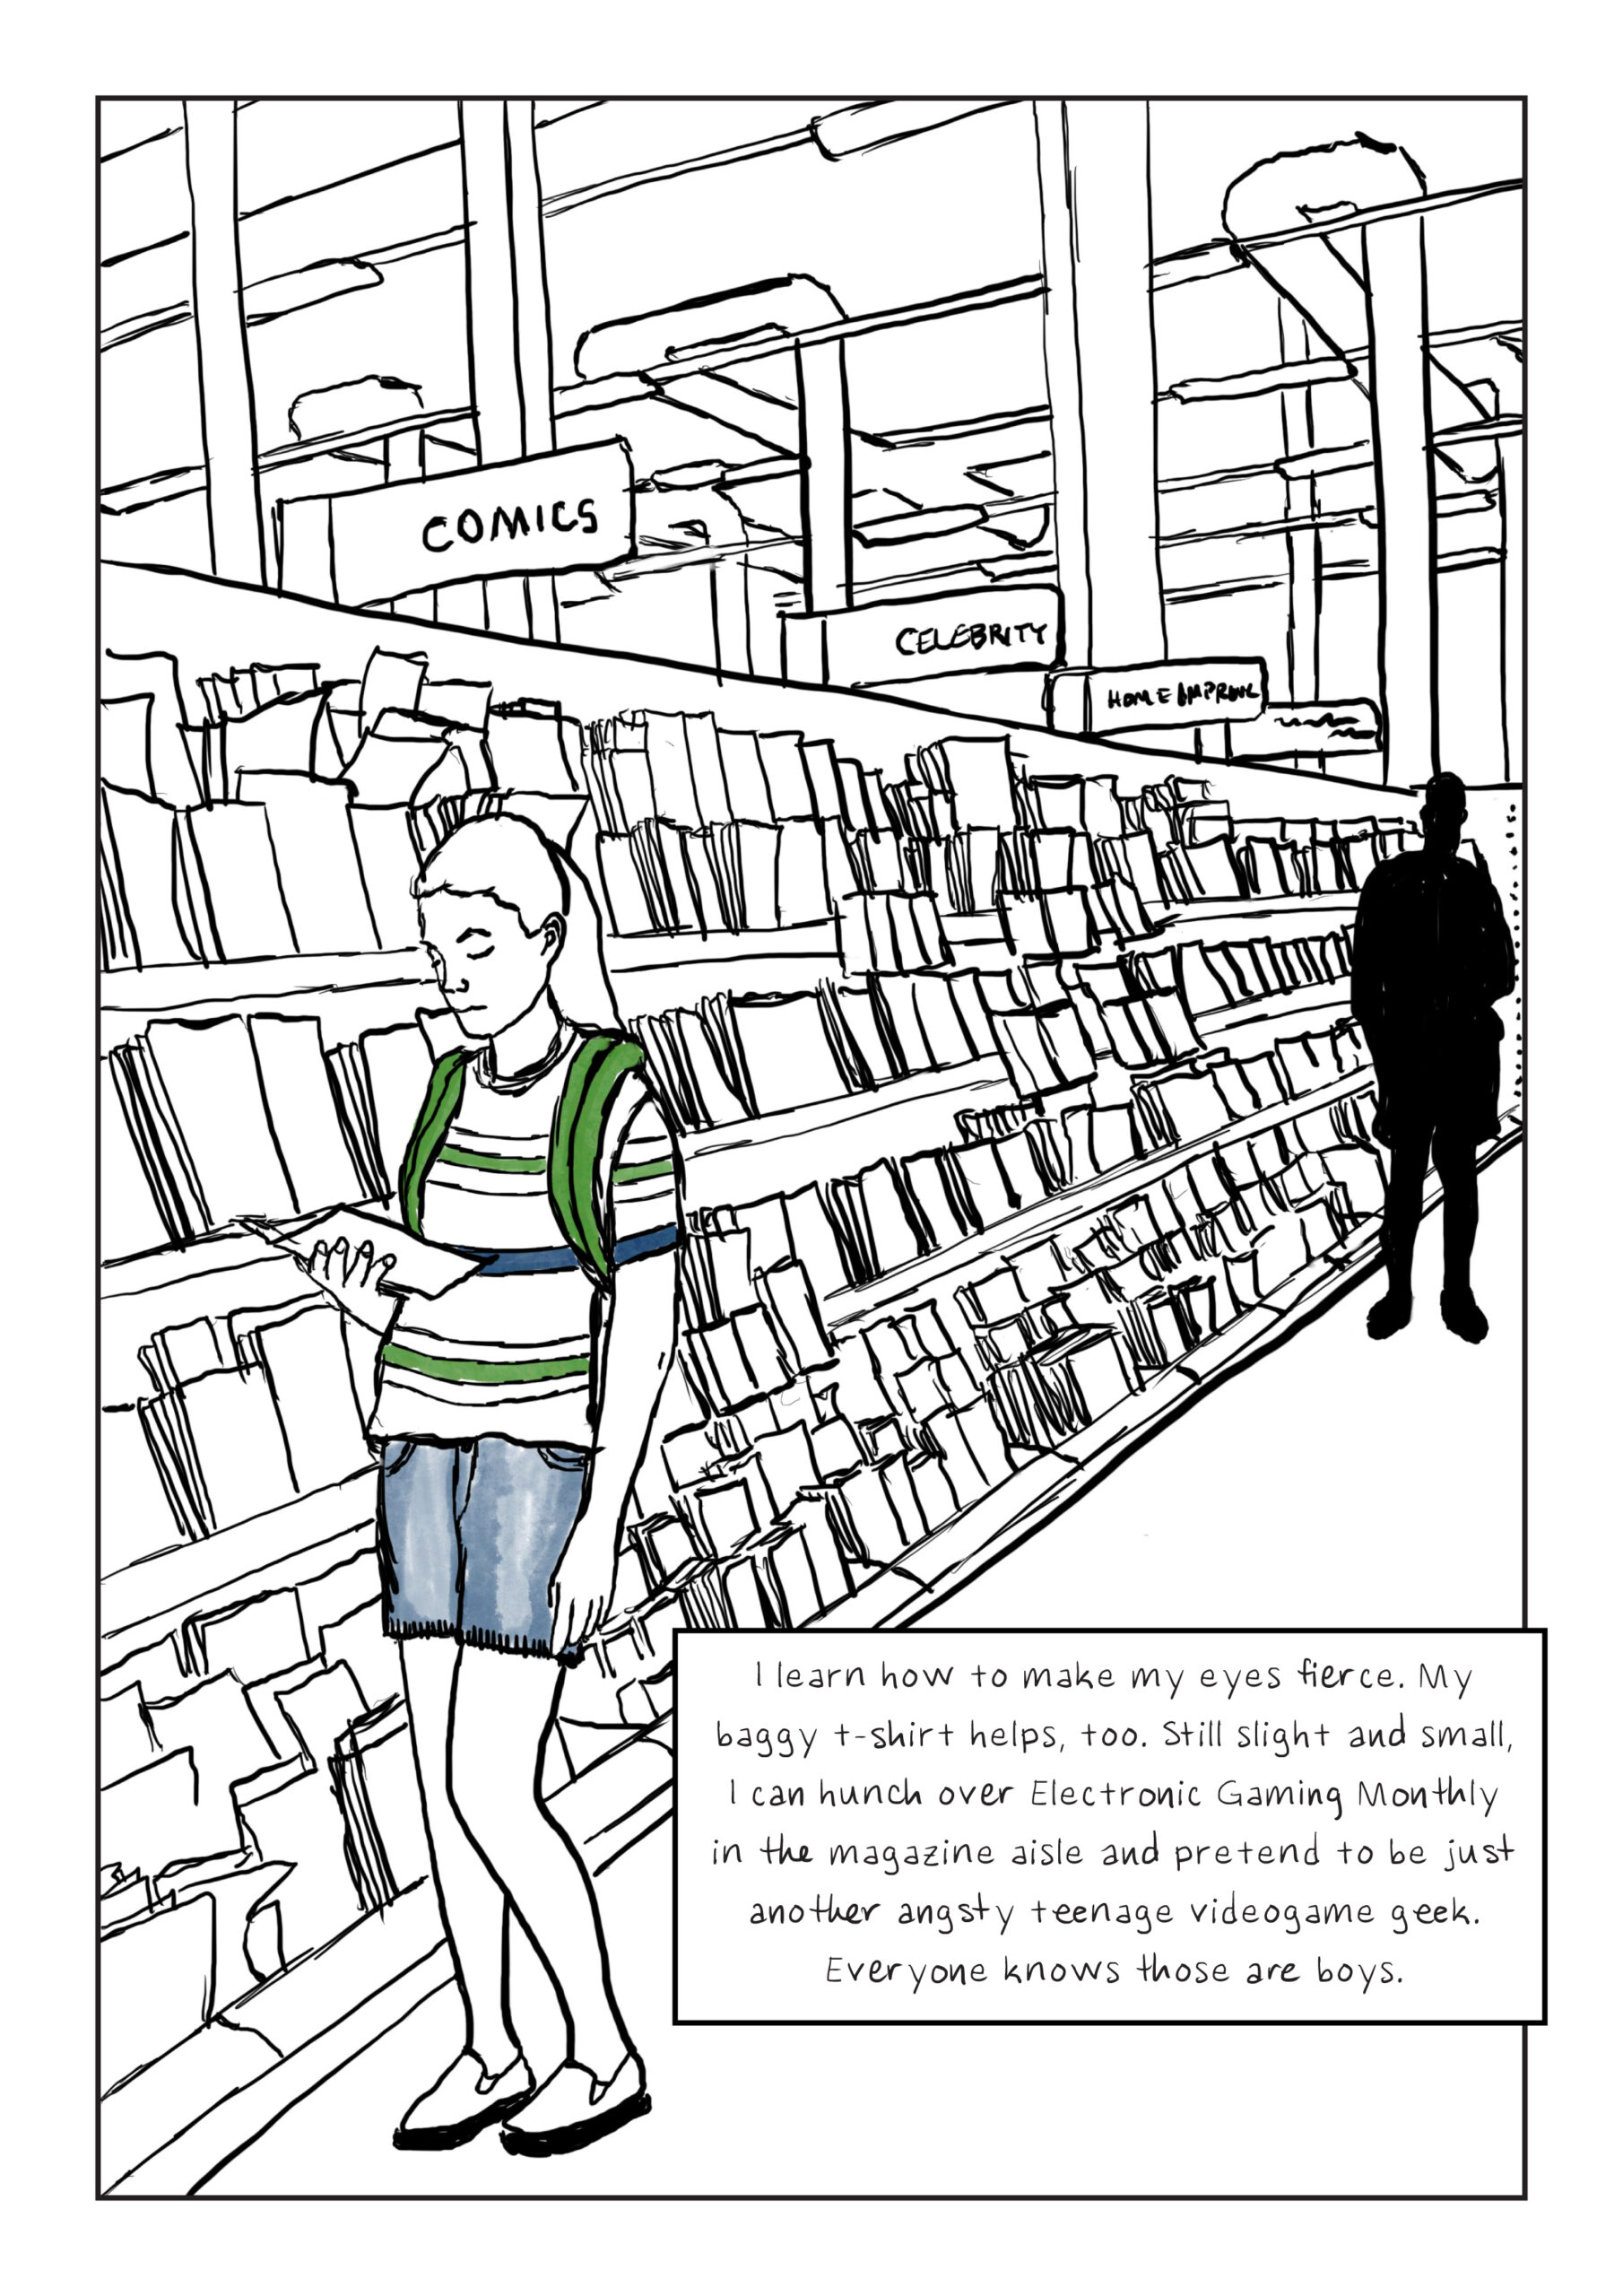 A drawing of a young girl reading a comic book in the magazine aisle of a grocery store. A shadowy figure looms at the opposite end of the aisle. Text: I learn how to make my eyes fierce. My baggy t-shirt helps, too. Still slight and small, I can hunch over Electronic Gaming Monthly in the magazine aisle and pretend to be just another angsty teenage videogame geek. Everyone knows those are boys.